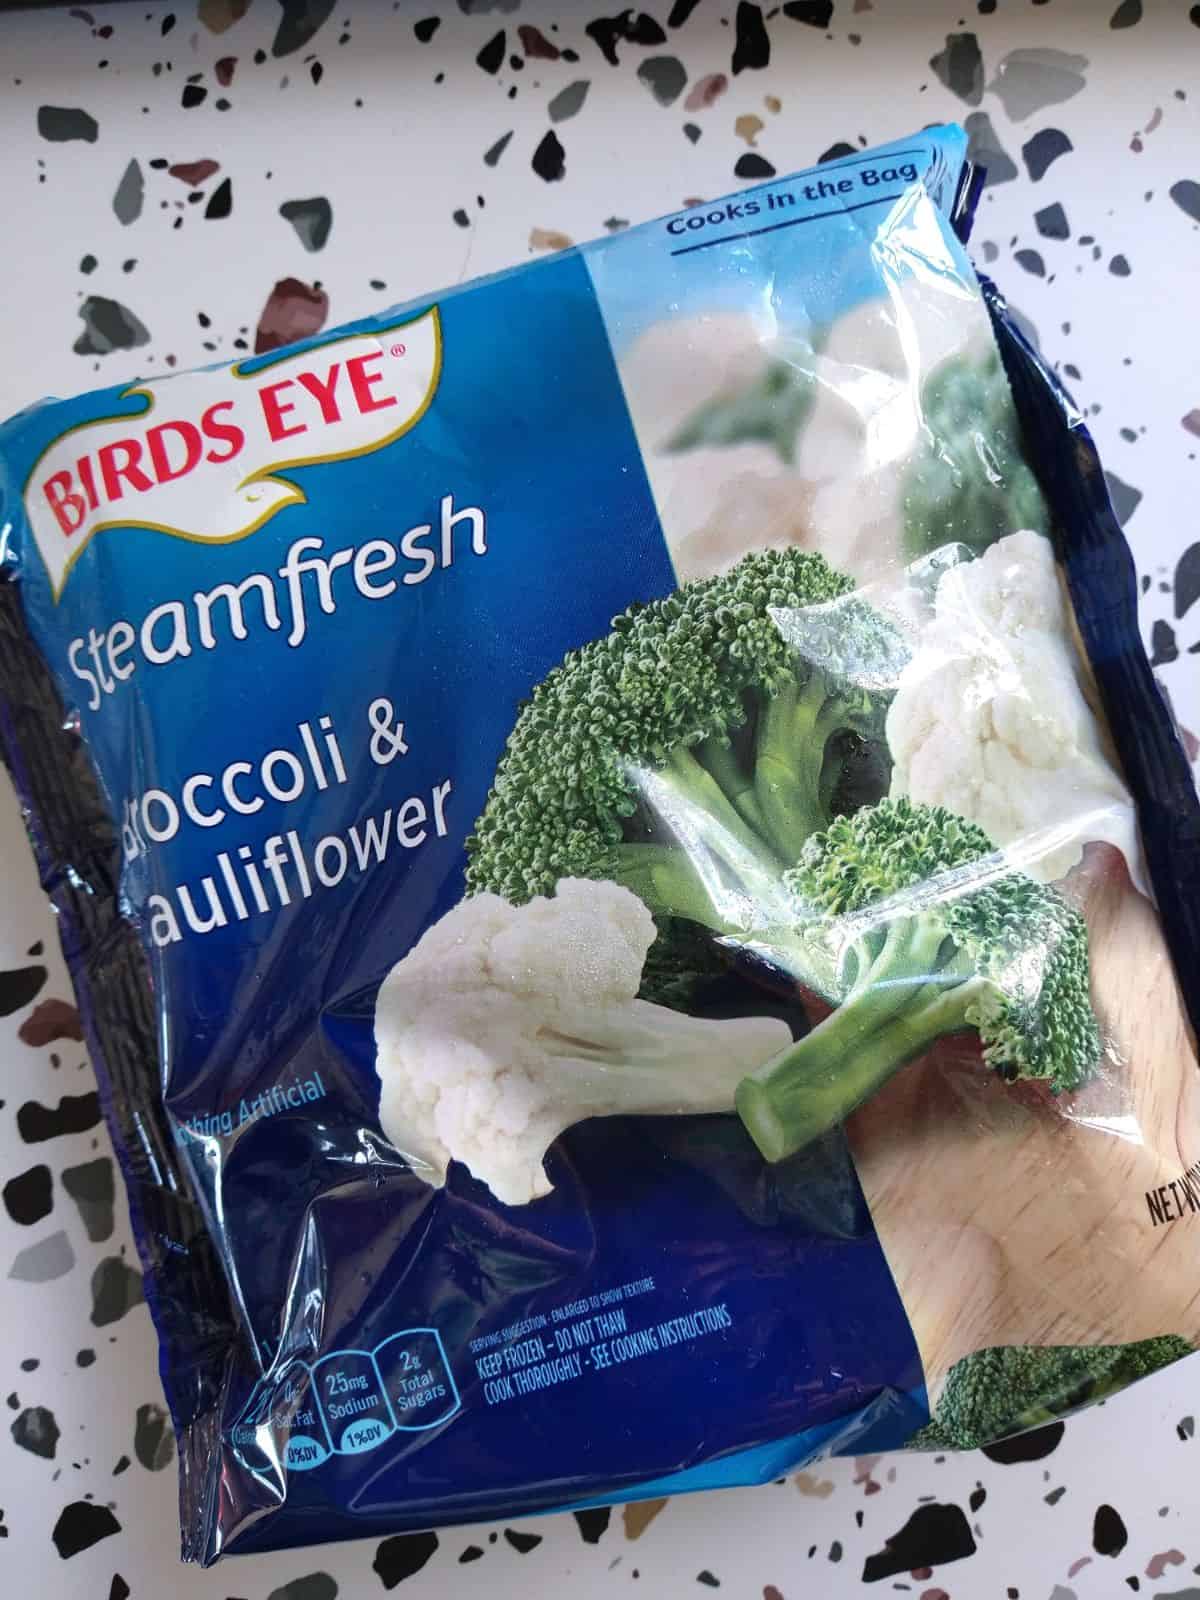 A bag of Birds Eye Steamfresh broccoli and cauliflower sitting on a white and dotted table. 